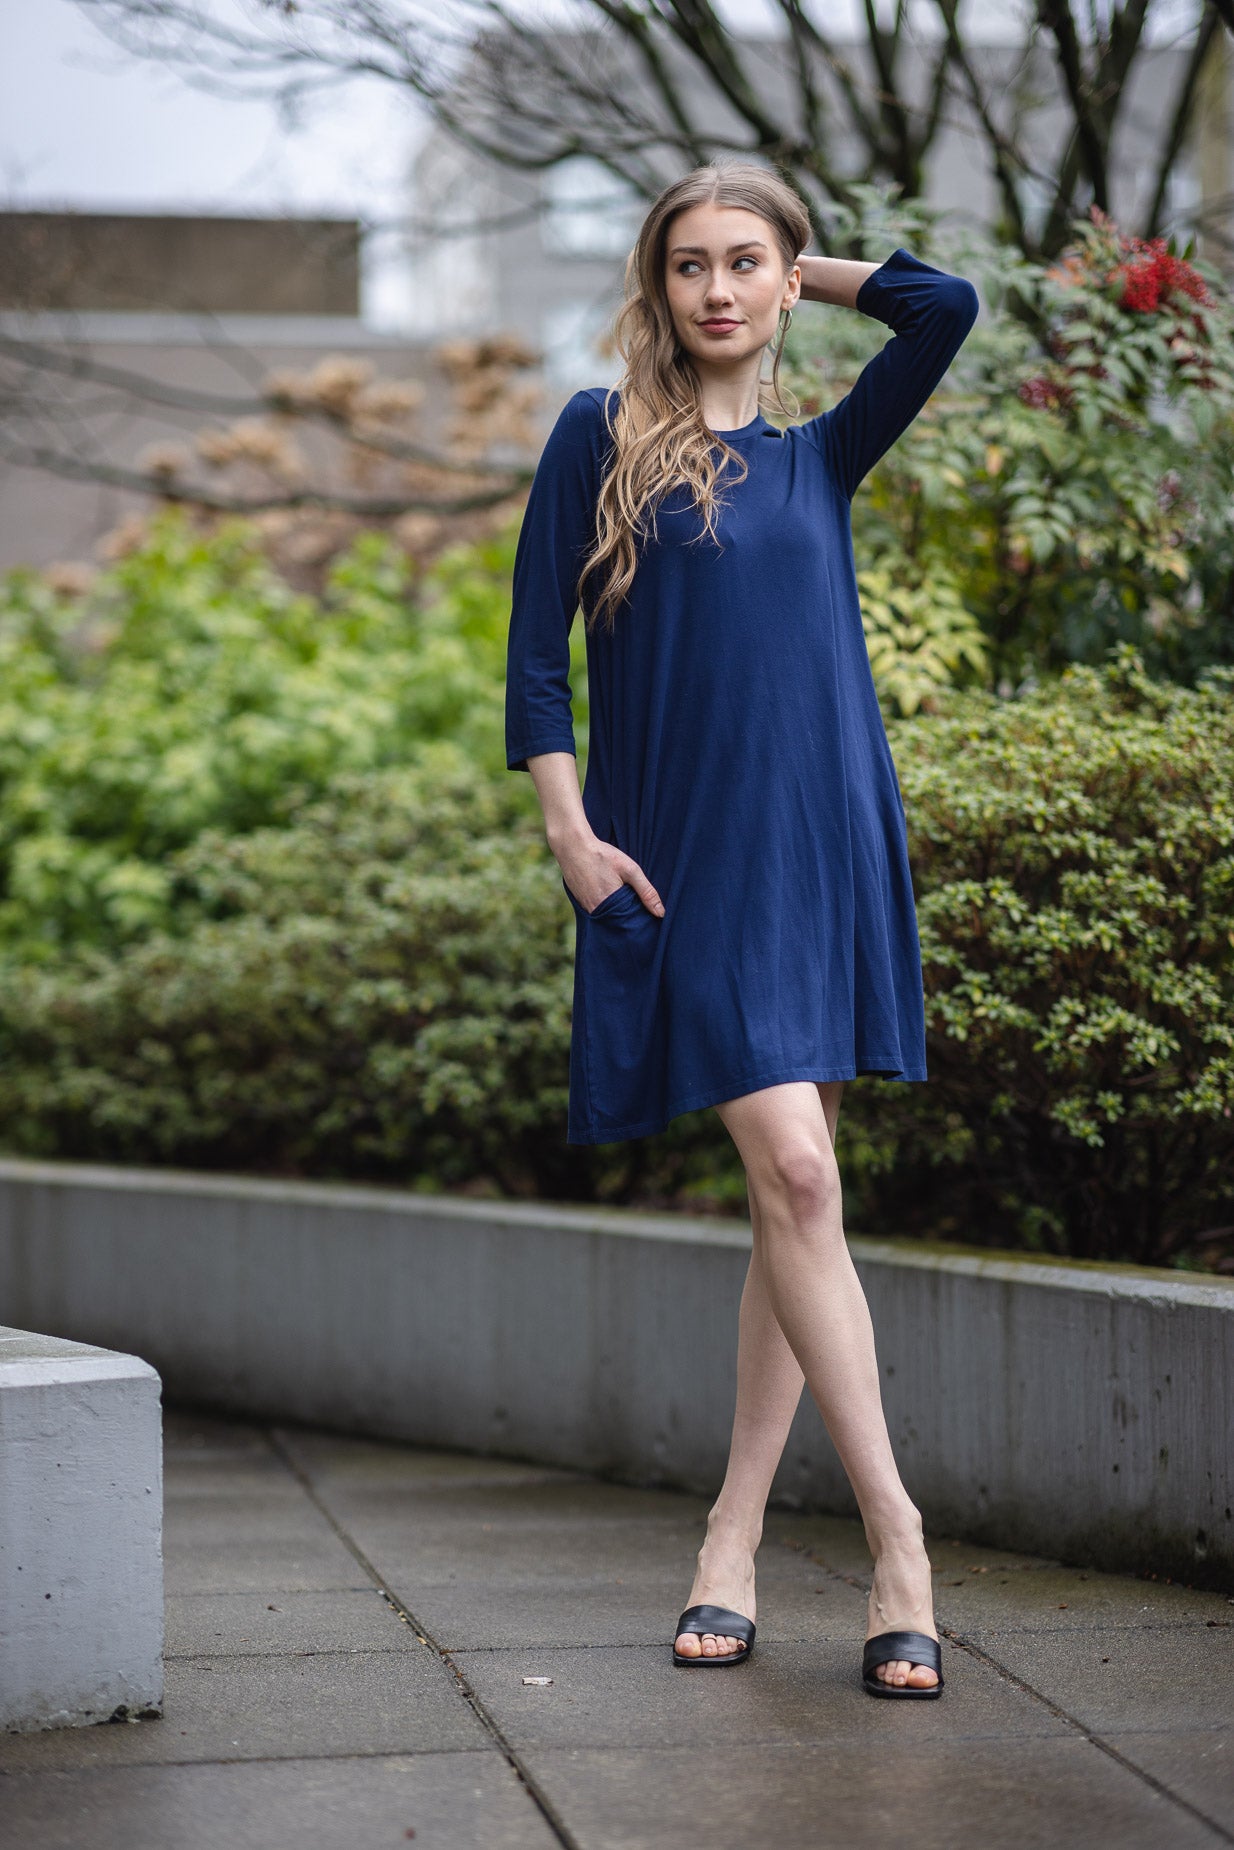 A Line Bamboo Knit Dress with Pockets